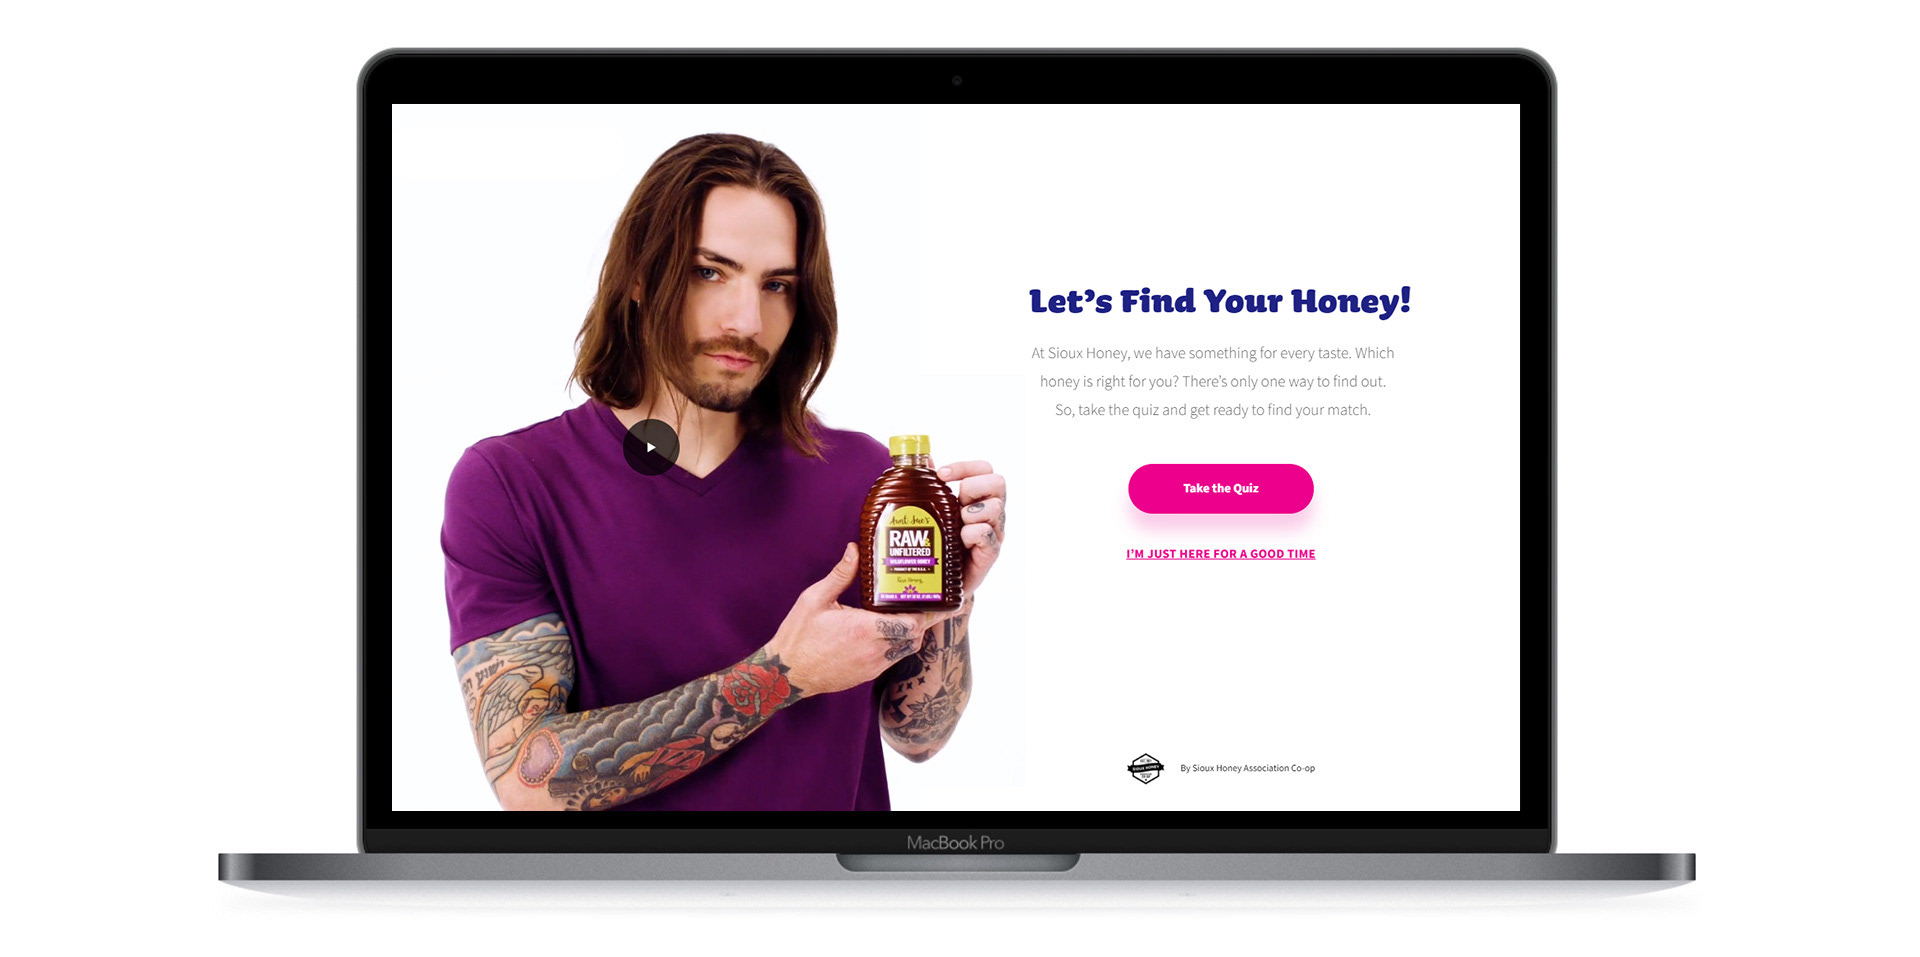 Find Your Honey Microsite Homepage on a Laptop